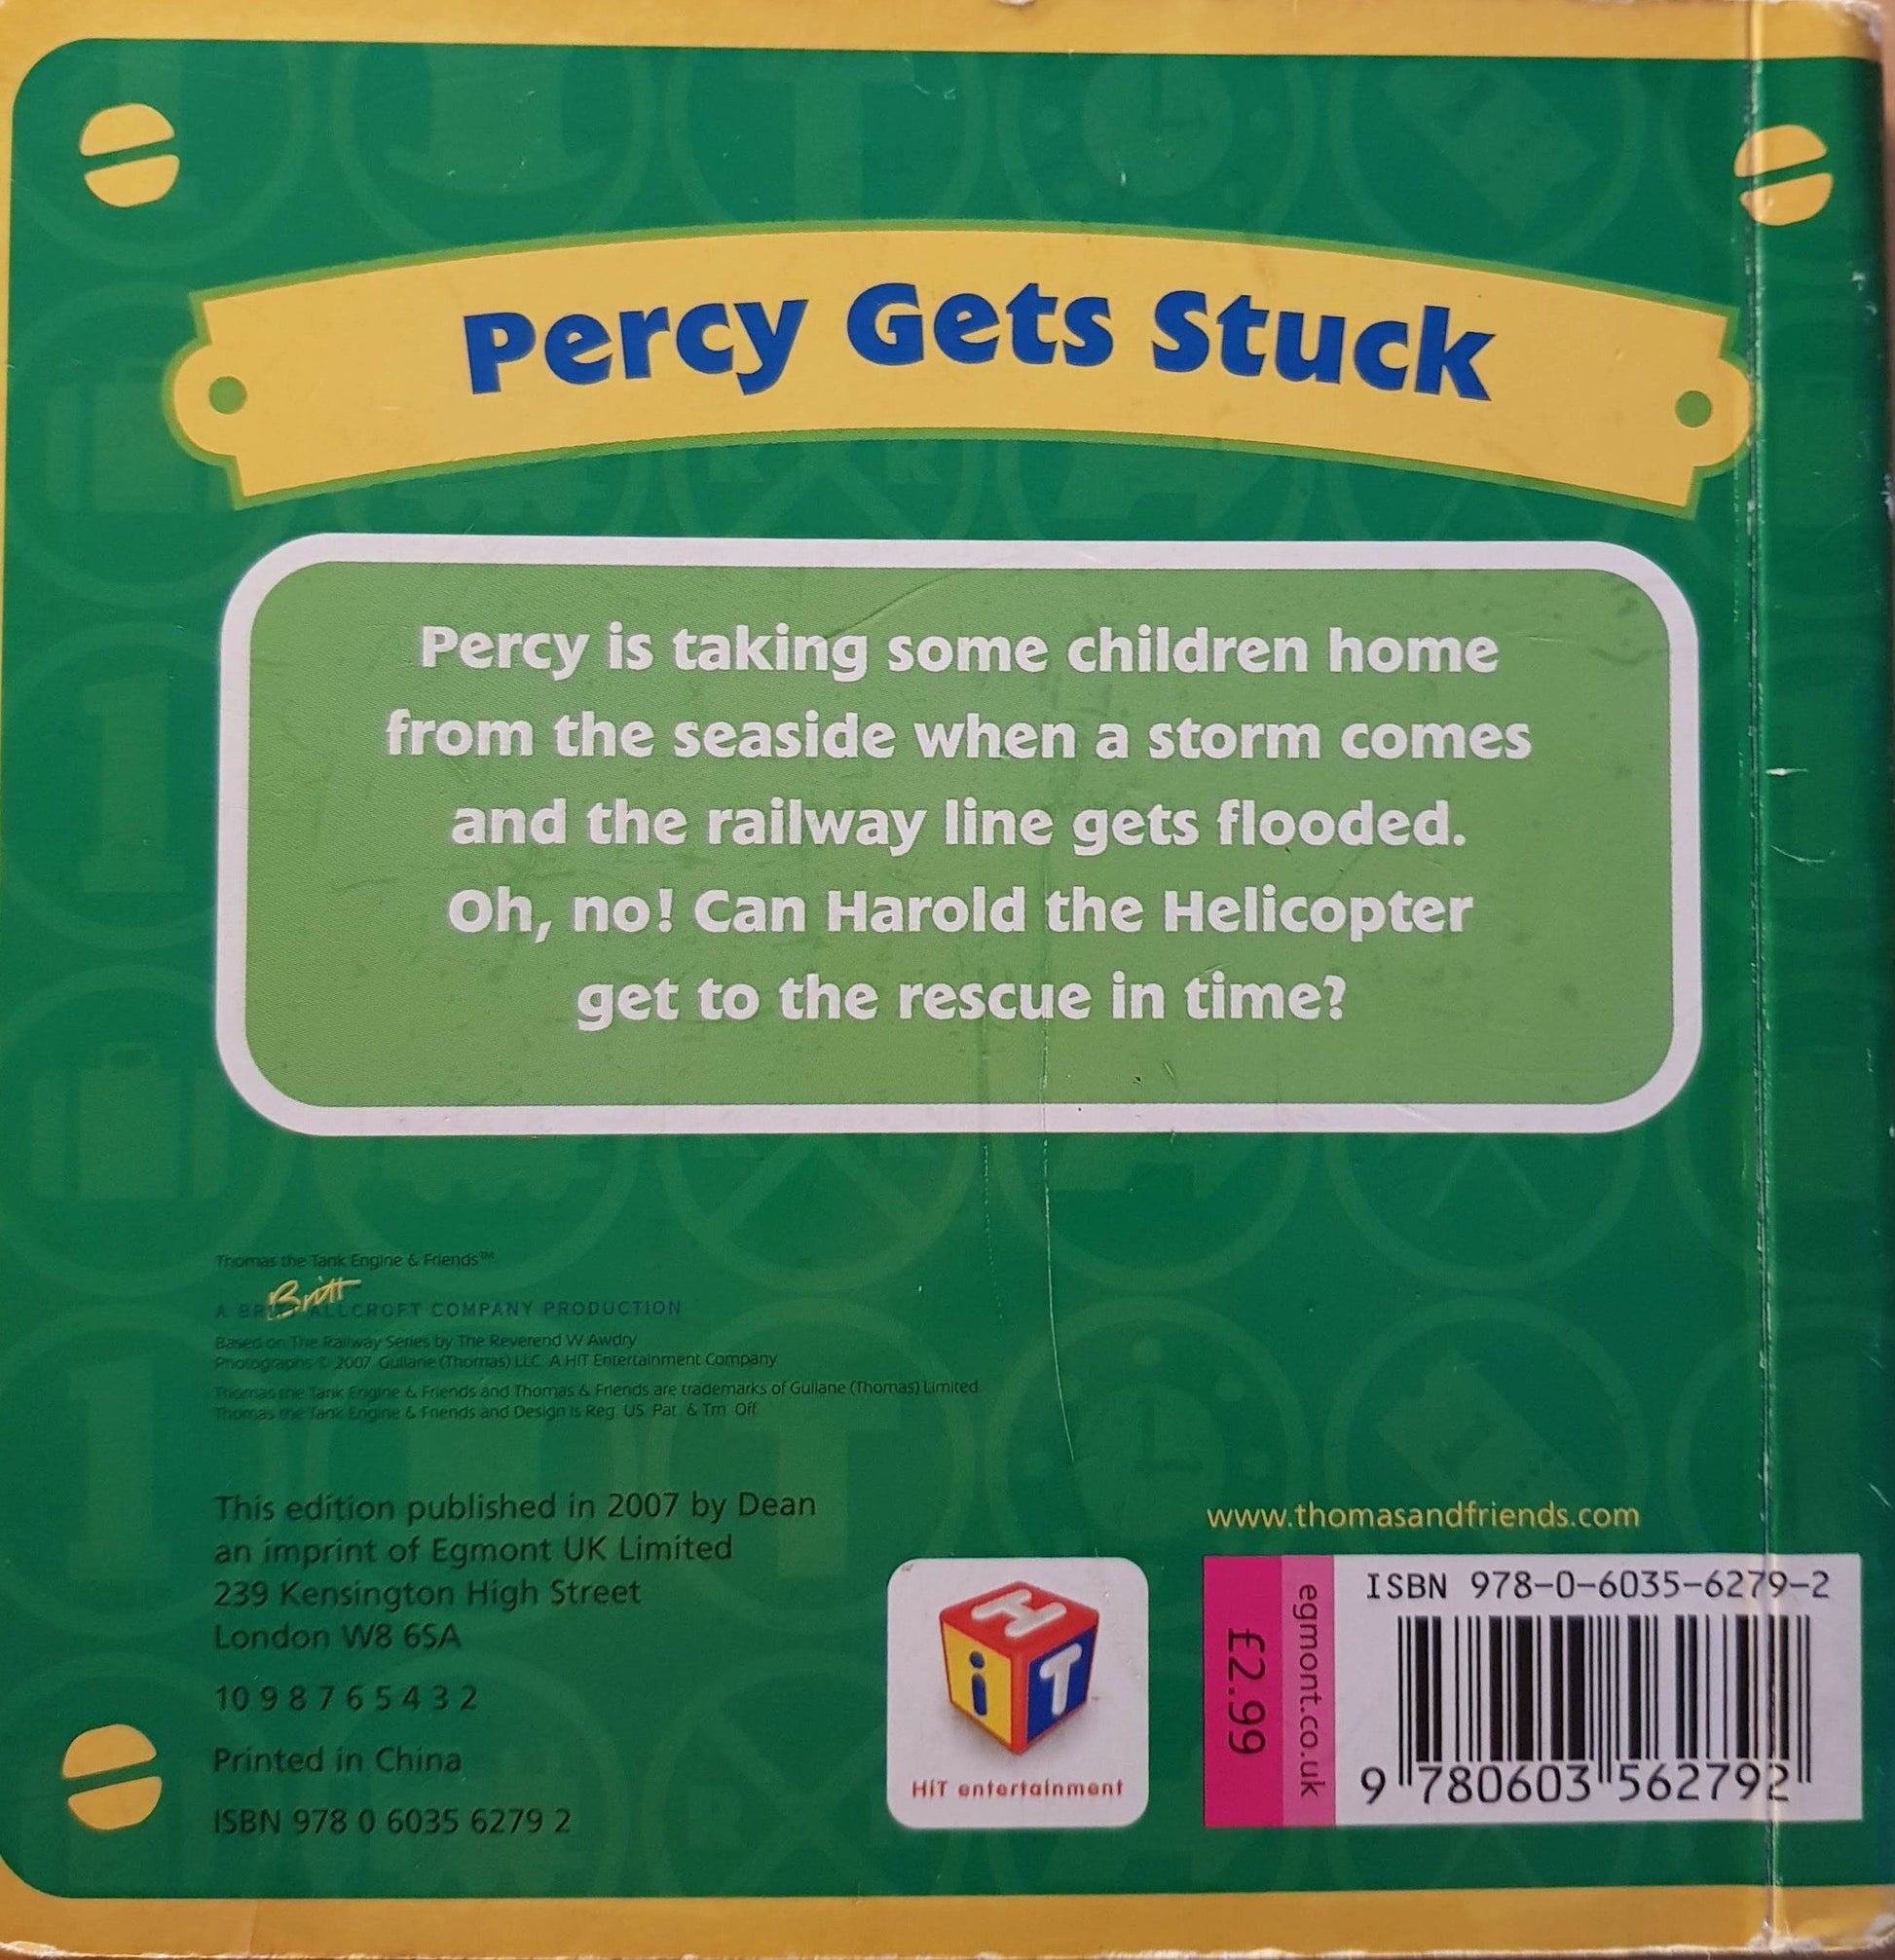 Percy Gets Stuck Well Read Thomas & Friends  (4619178344503)